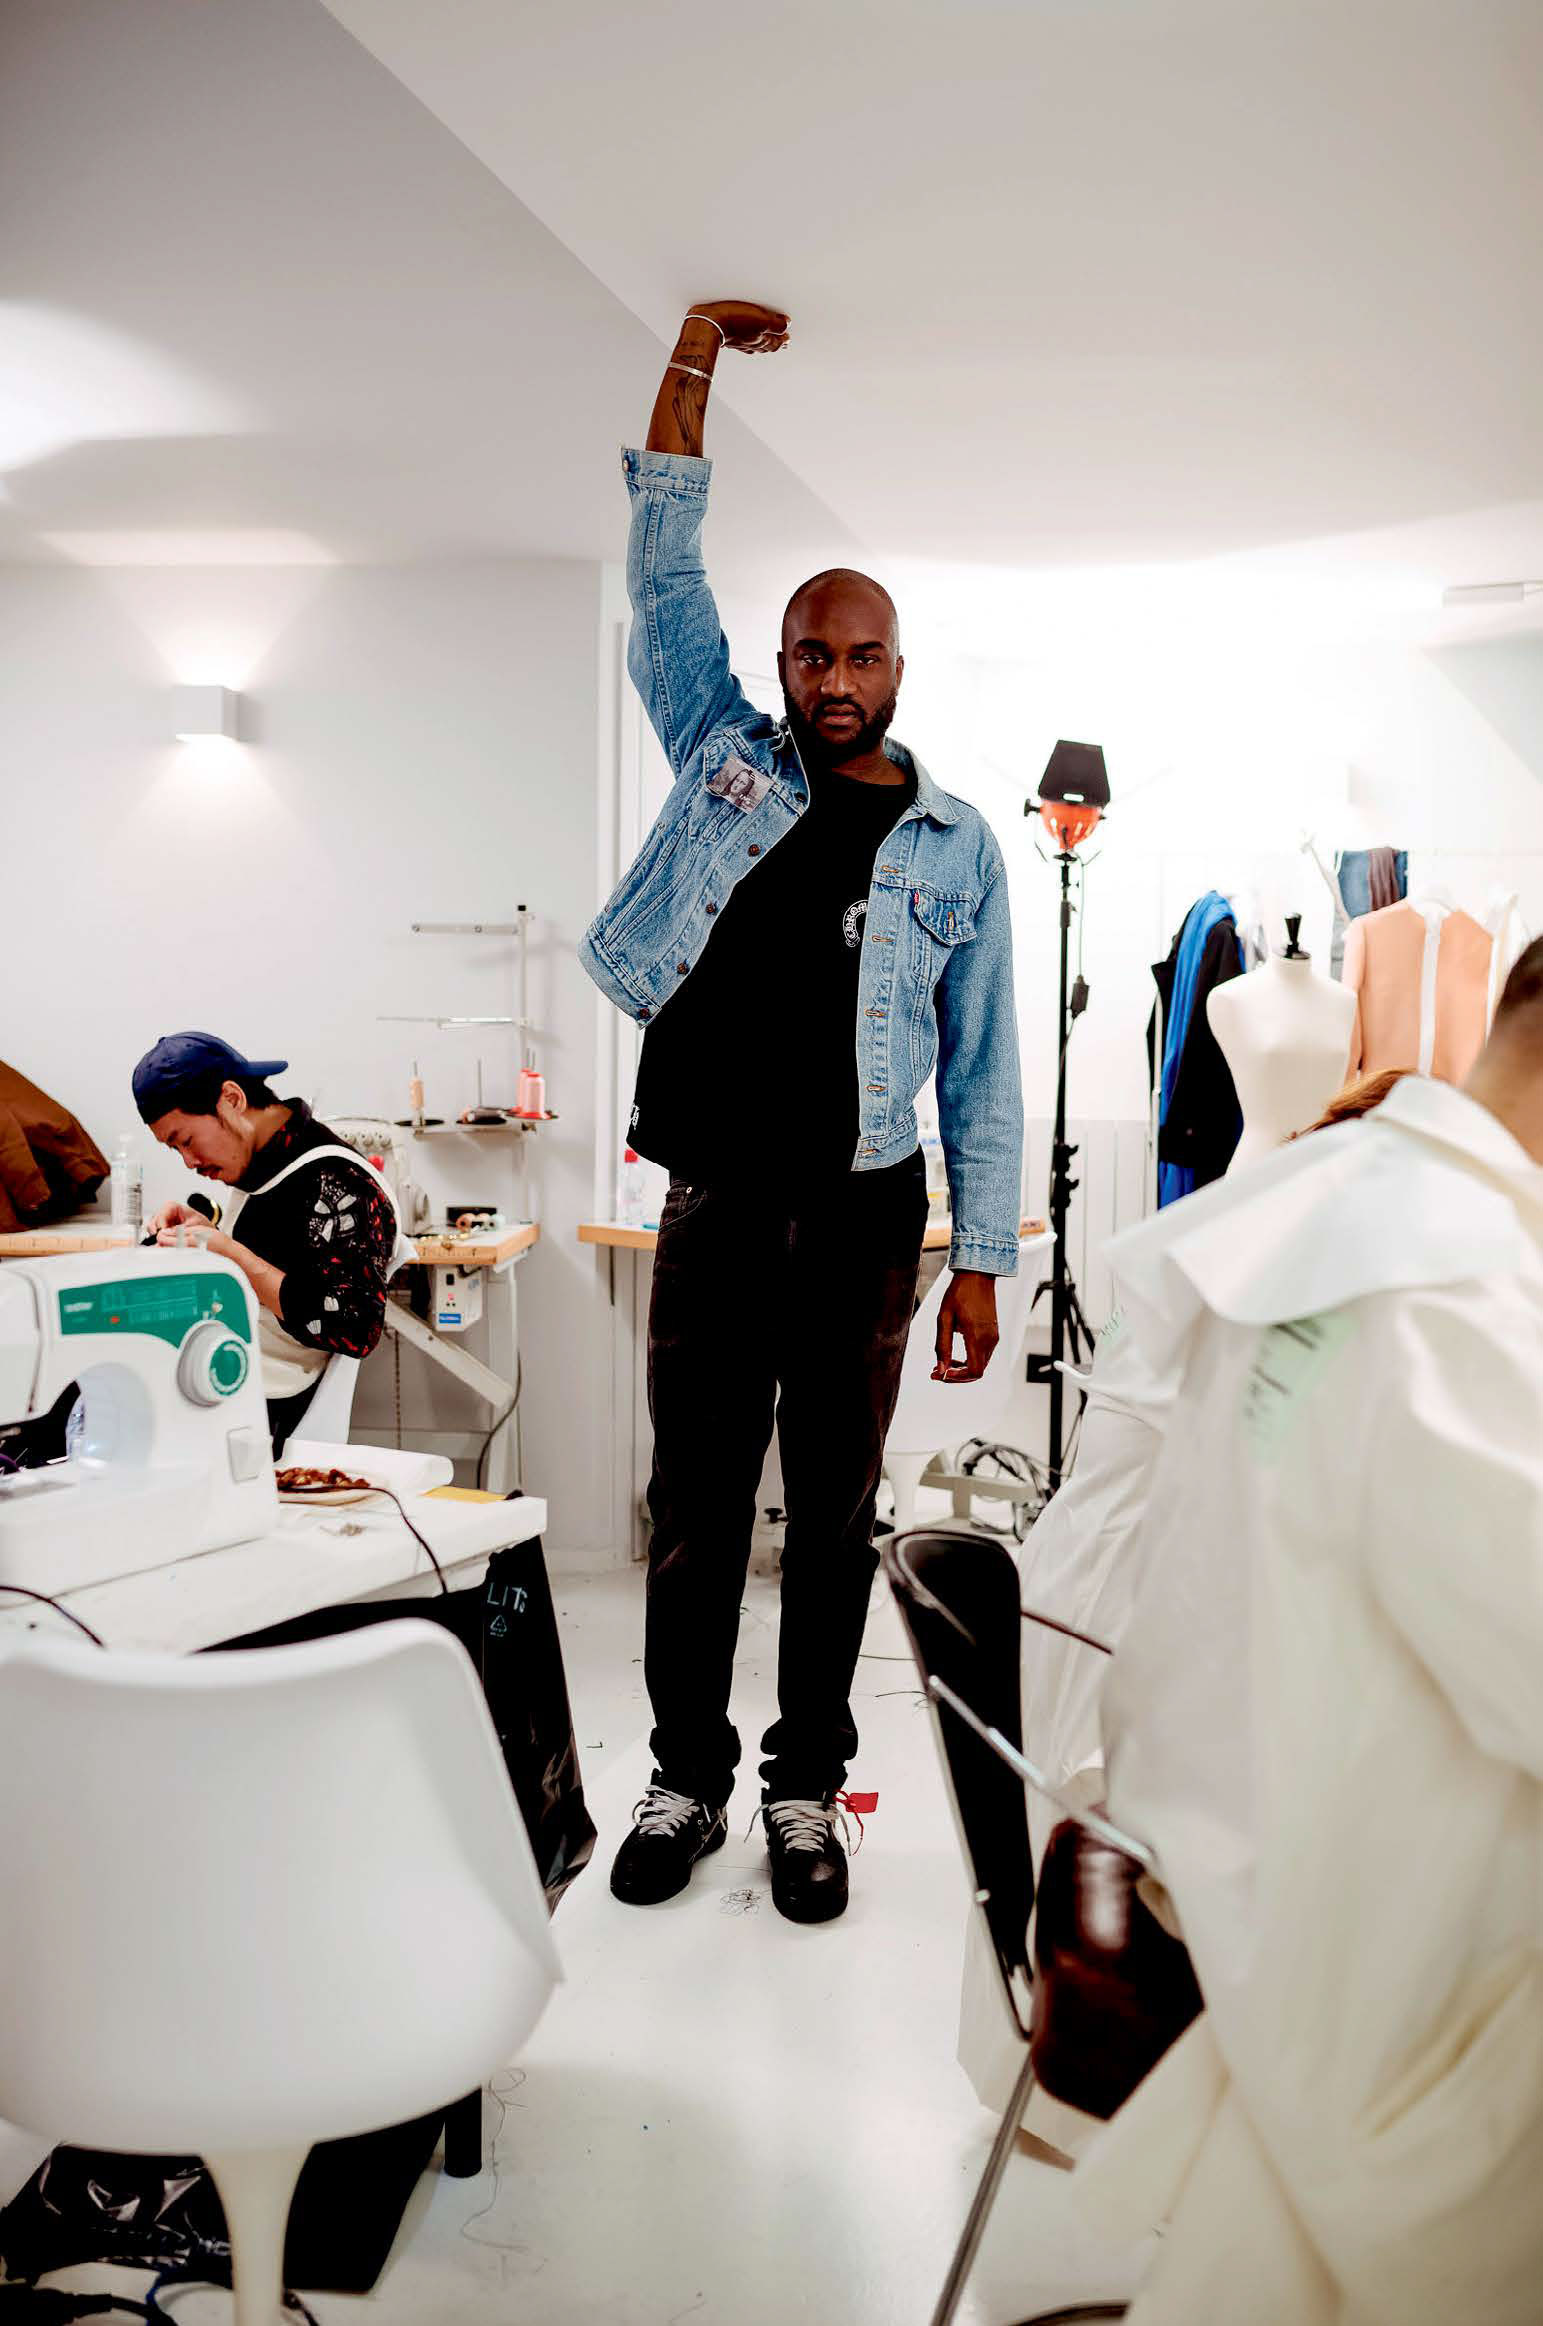 Virgil Abloh: Notes and Further Thinking – Danmei Luo's Learning